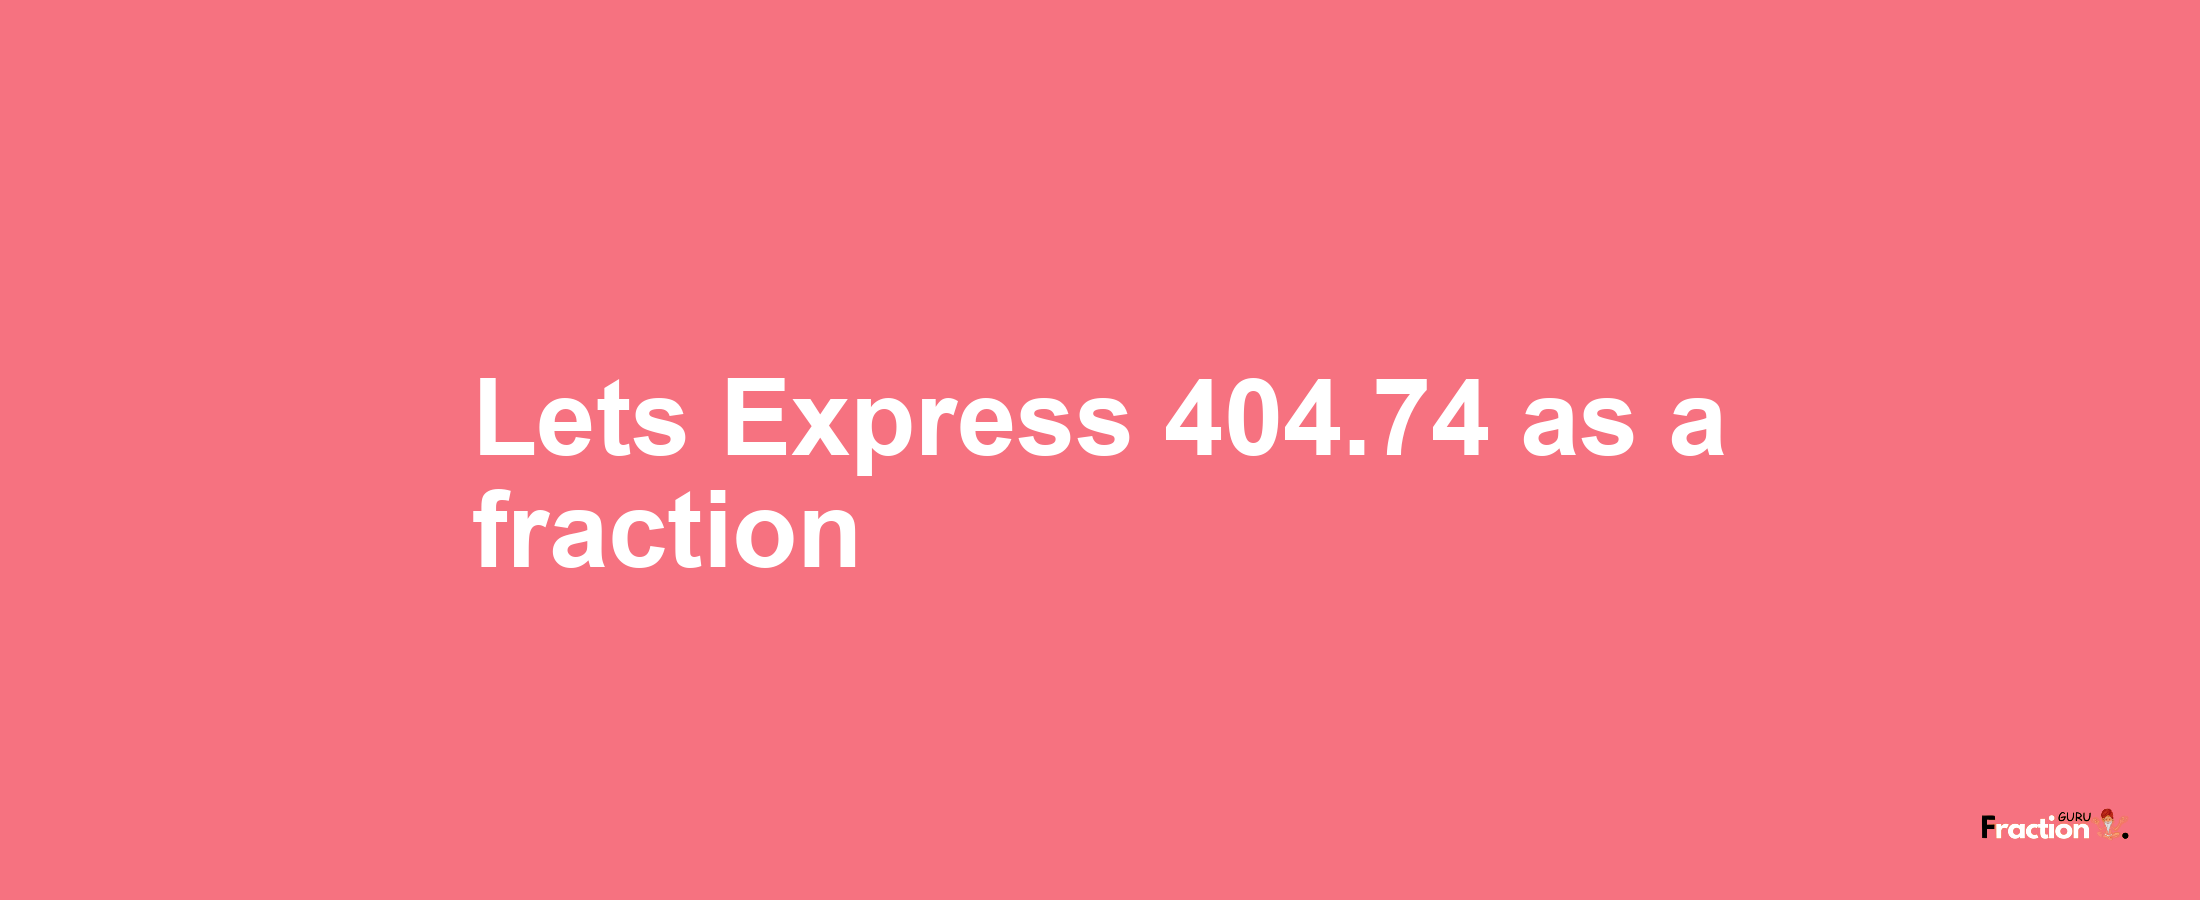 Lets Express 404.74 as afraction